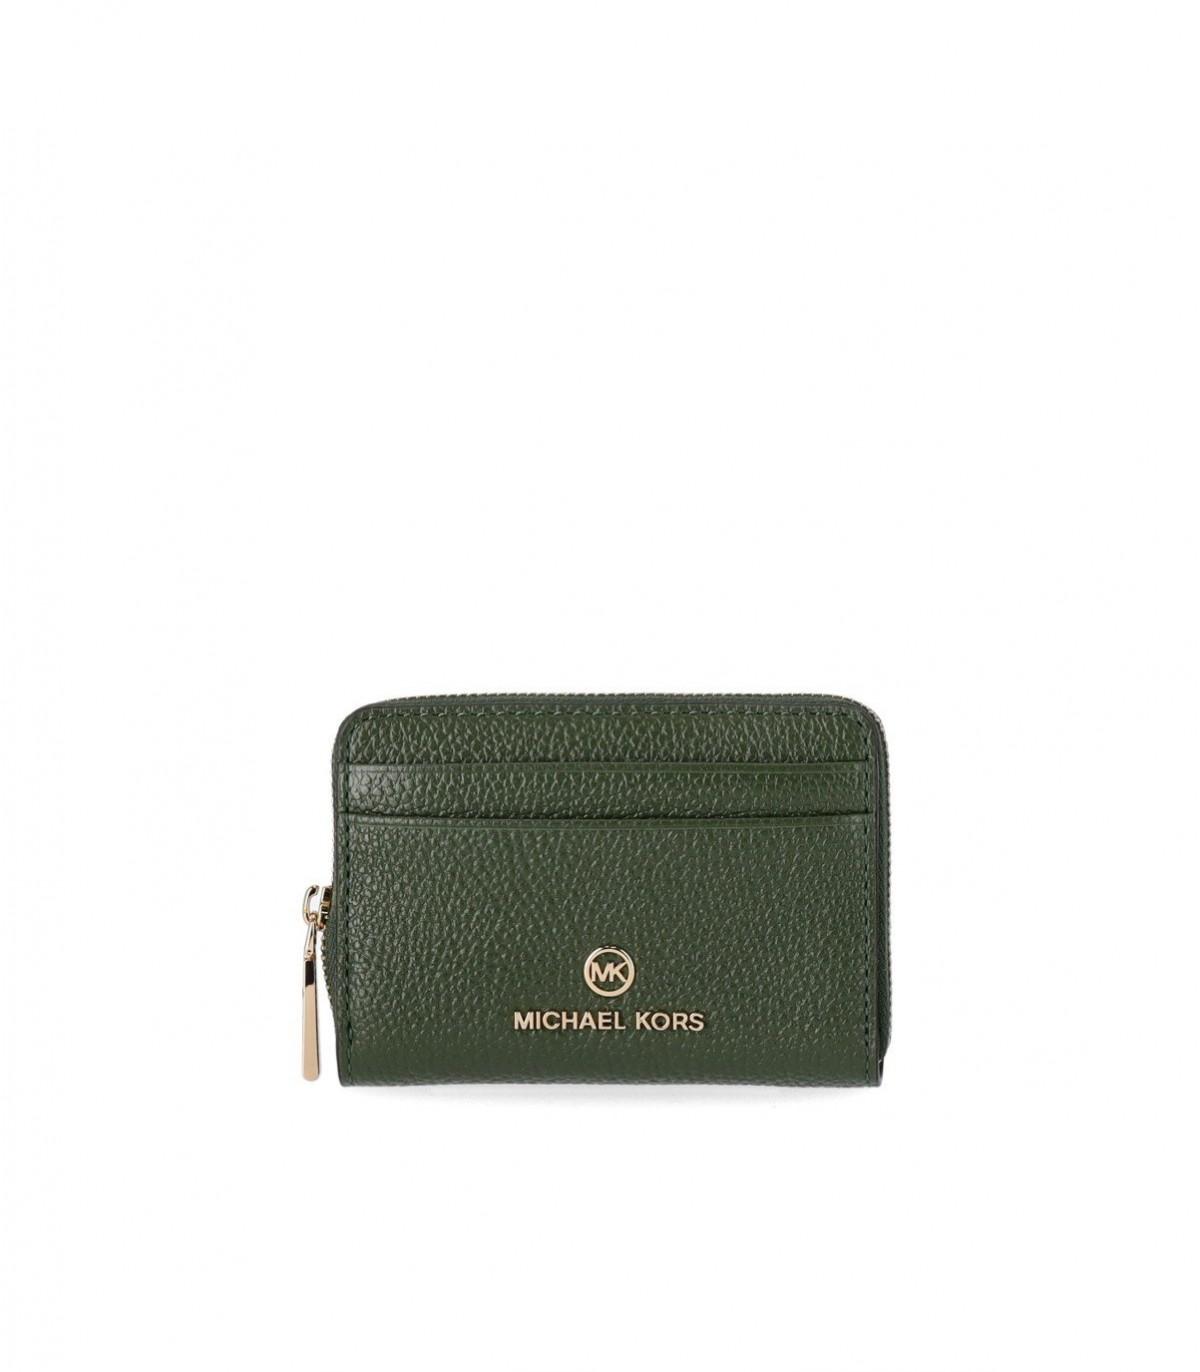 Michael Kors Jet Set Charm Small Wallet in Green